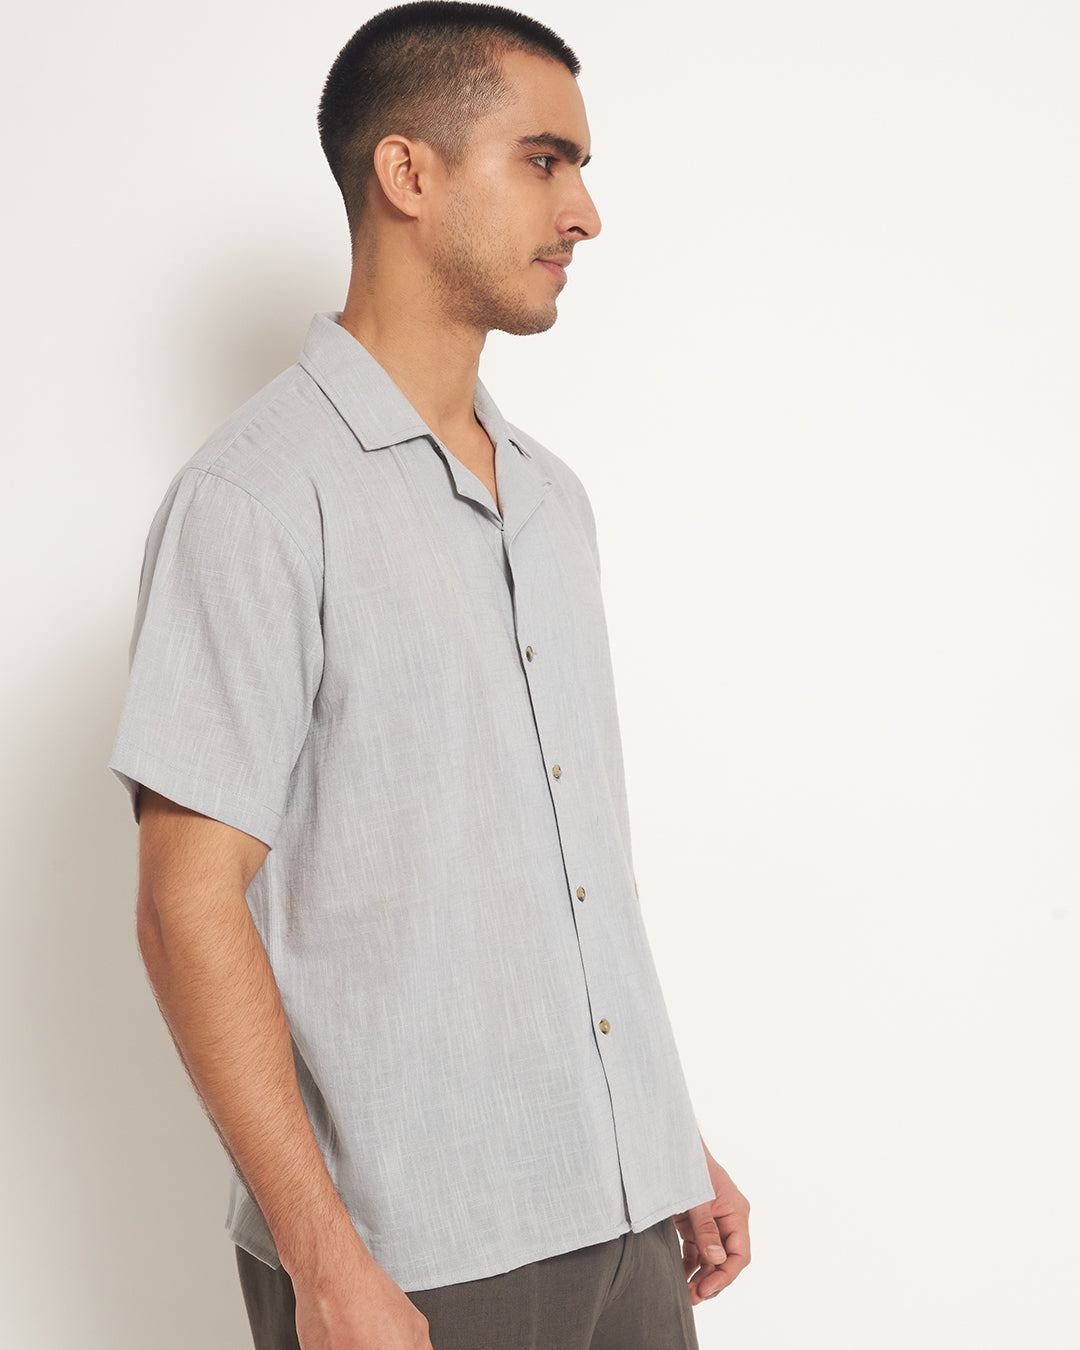 Combo : Classic Iced Grey & Forest Green Men's Half Sleeves Shirt